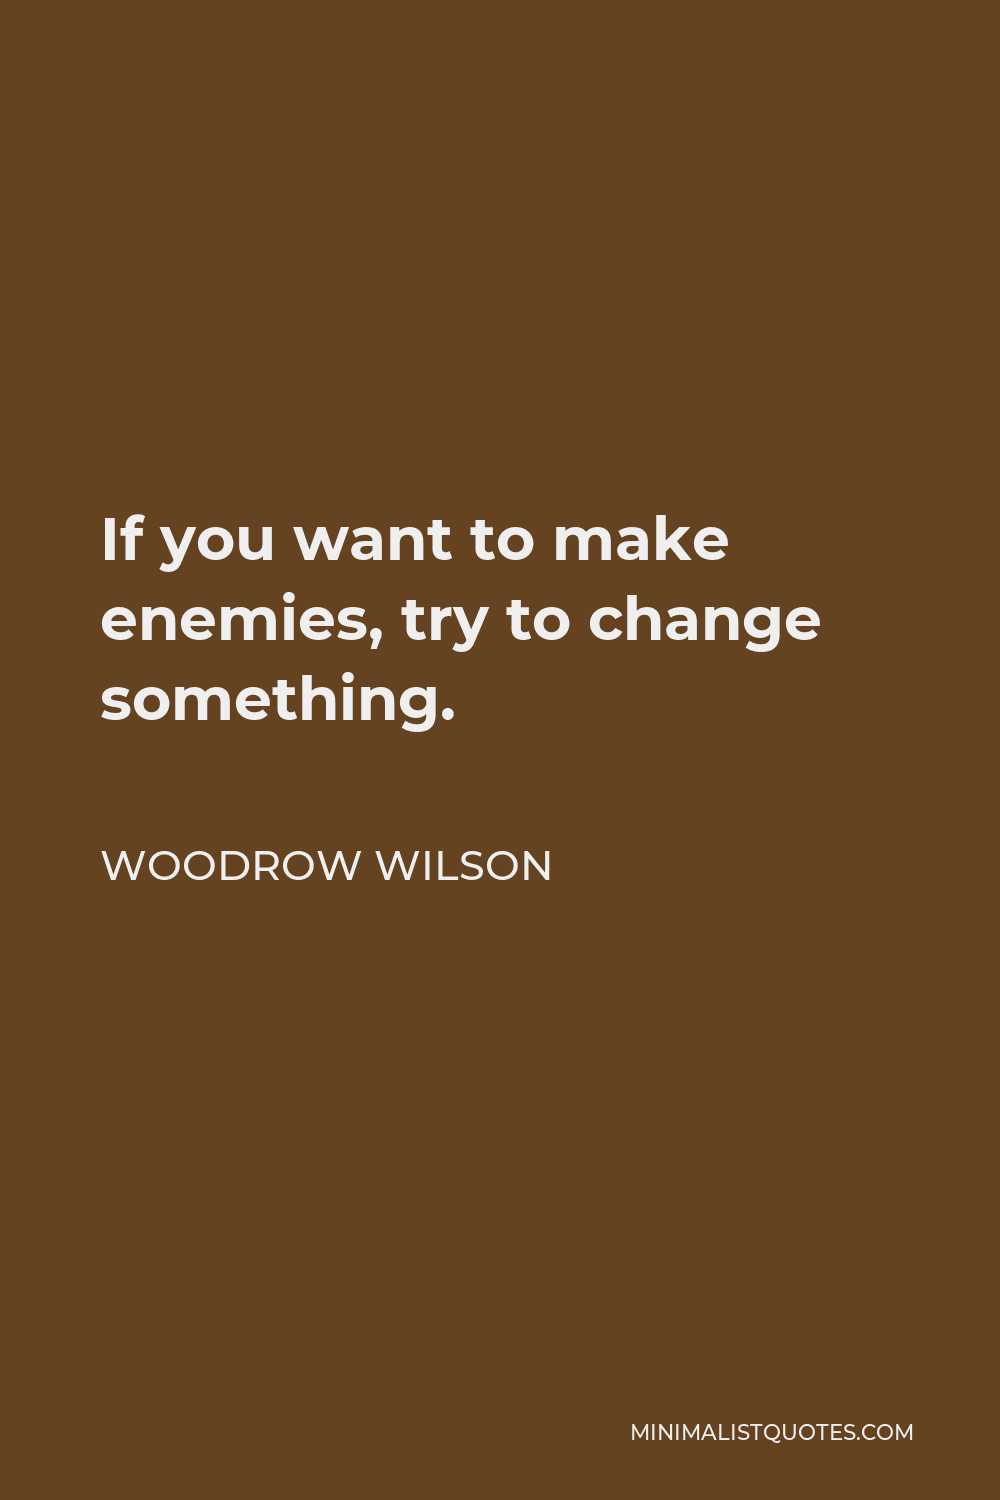 Woodrow Wilson Quote - If you want to make enemies, try to change something.